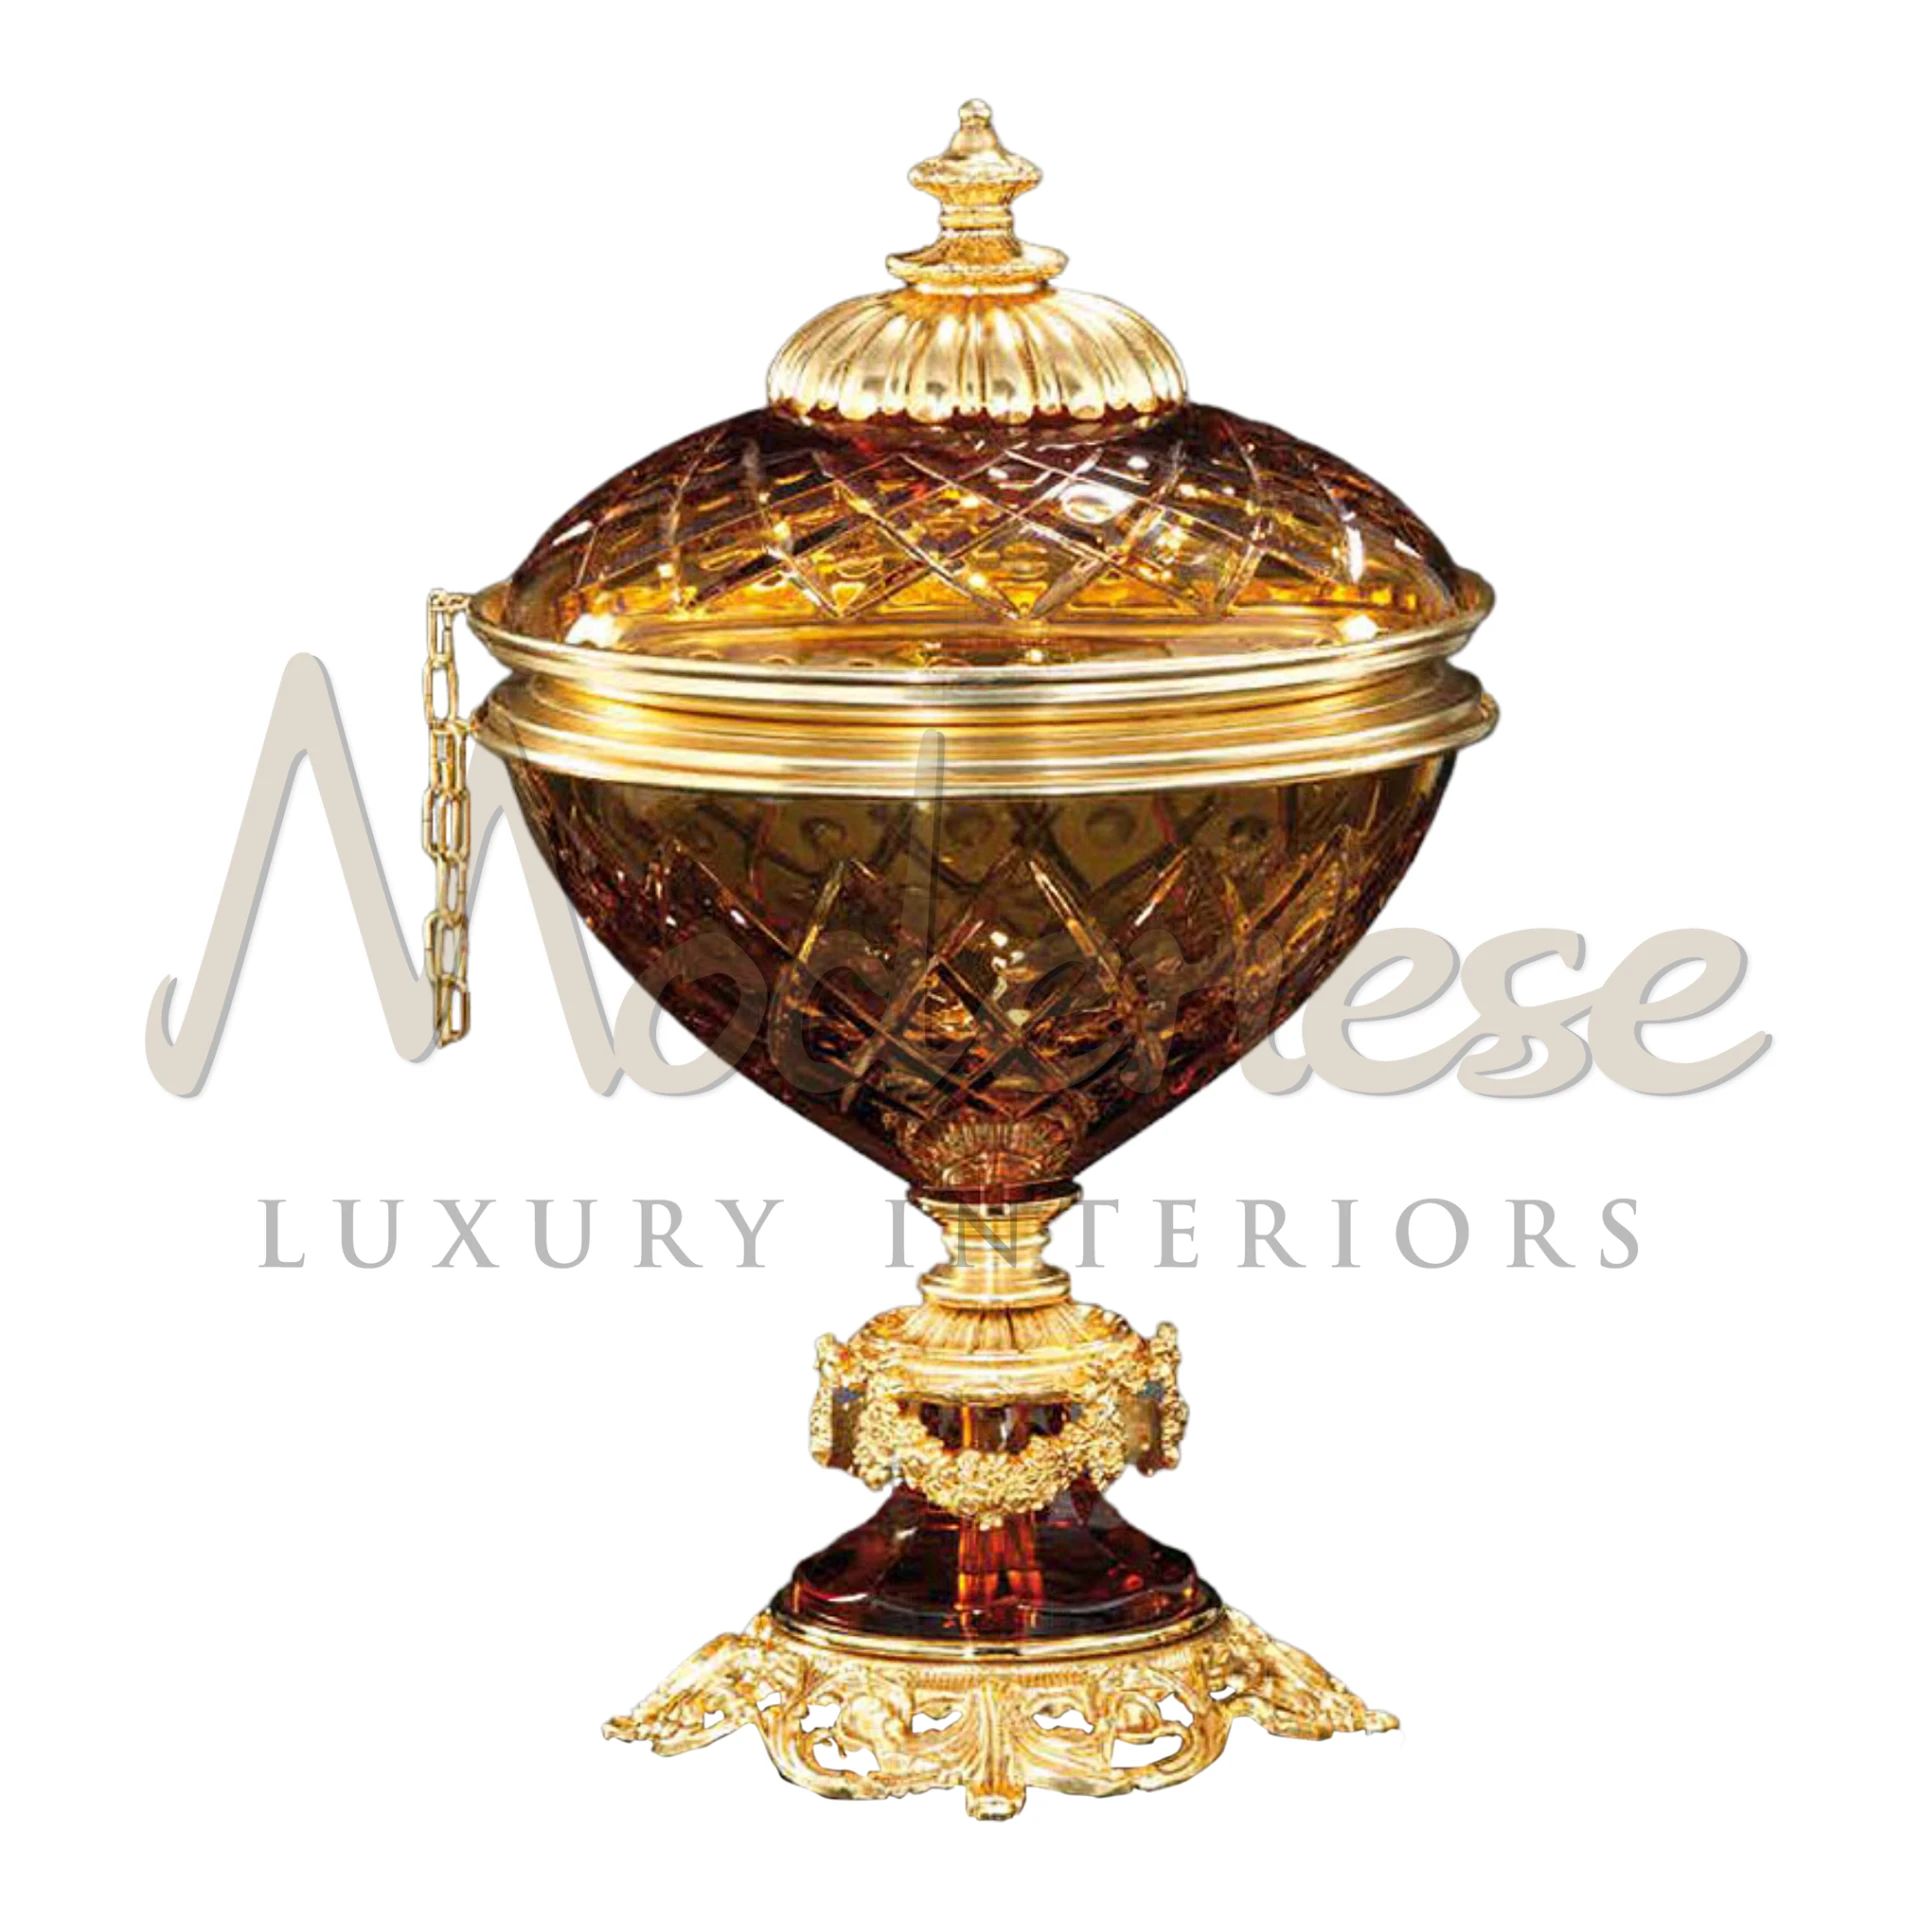 
Luxurious Imperial Crystal Box, handcrafted with exquisite details, perfect for enhancing classic and baroque styled luxury interiors.